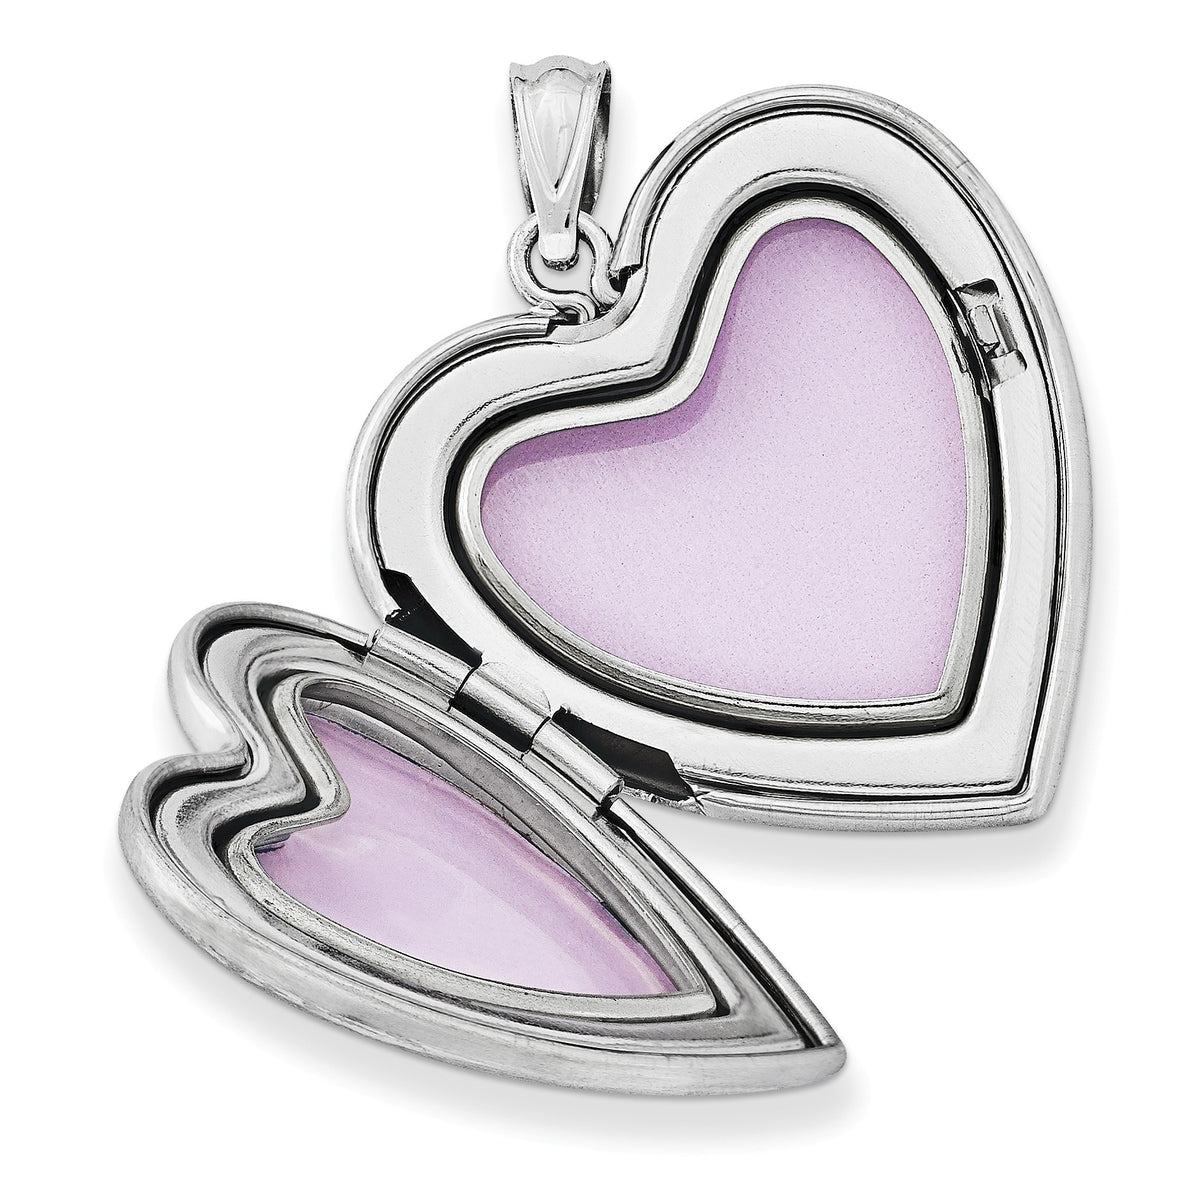 Alternate view of the Sterling Silver and Enamel 24mm Mom Rose Heart Locket by The Black Bow Jewelry Co.